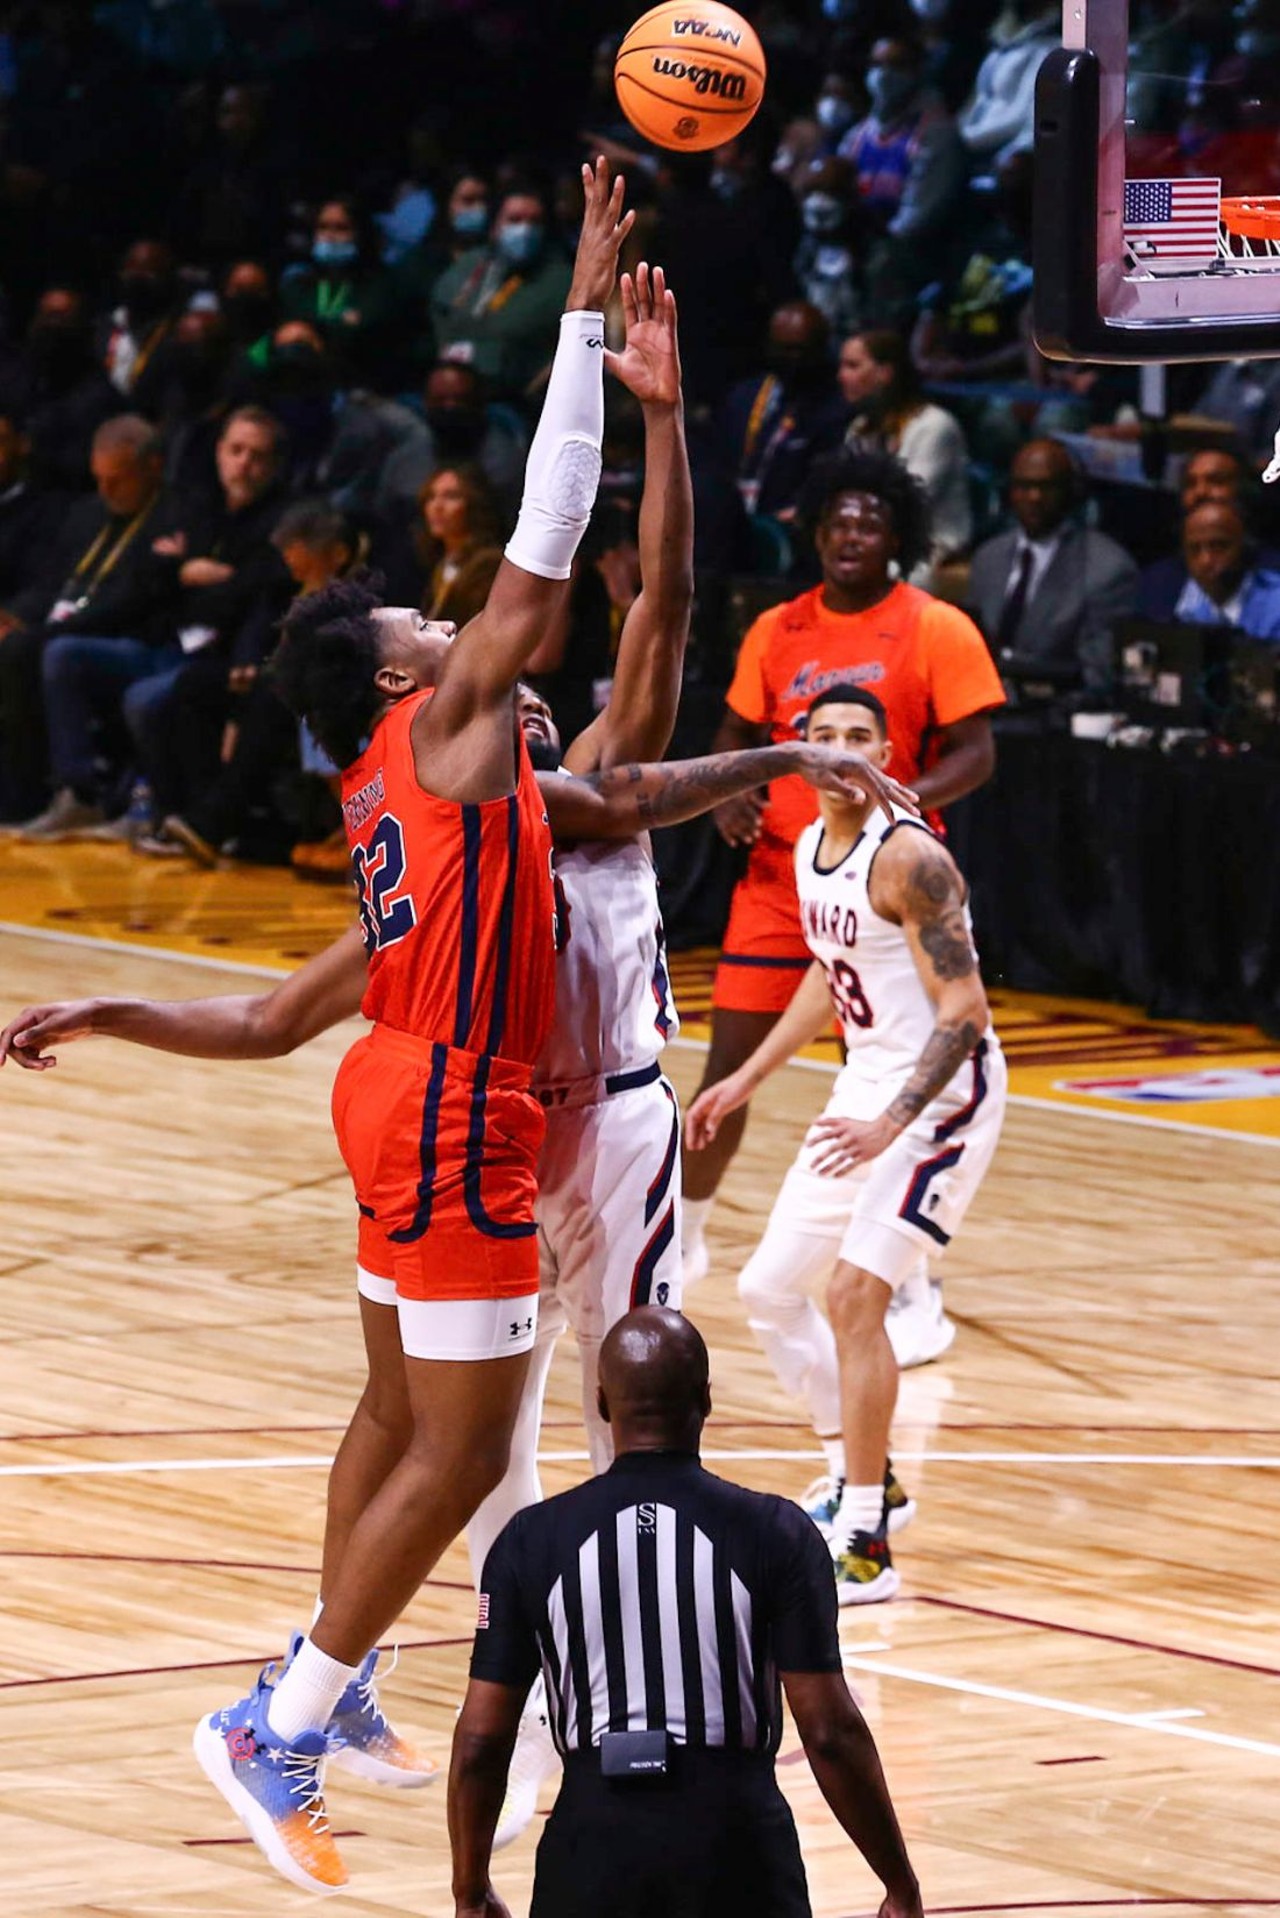 Photos from the HBCU Classic at Wolstein Center